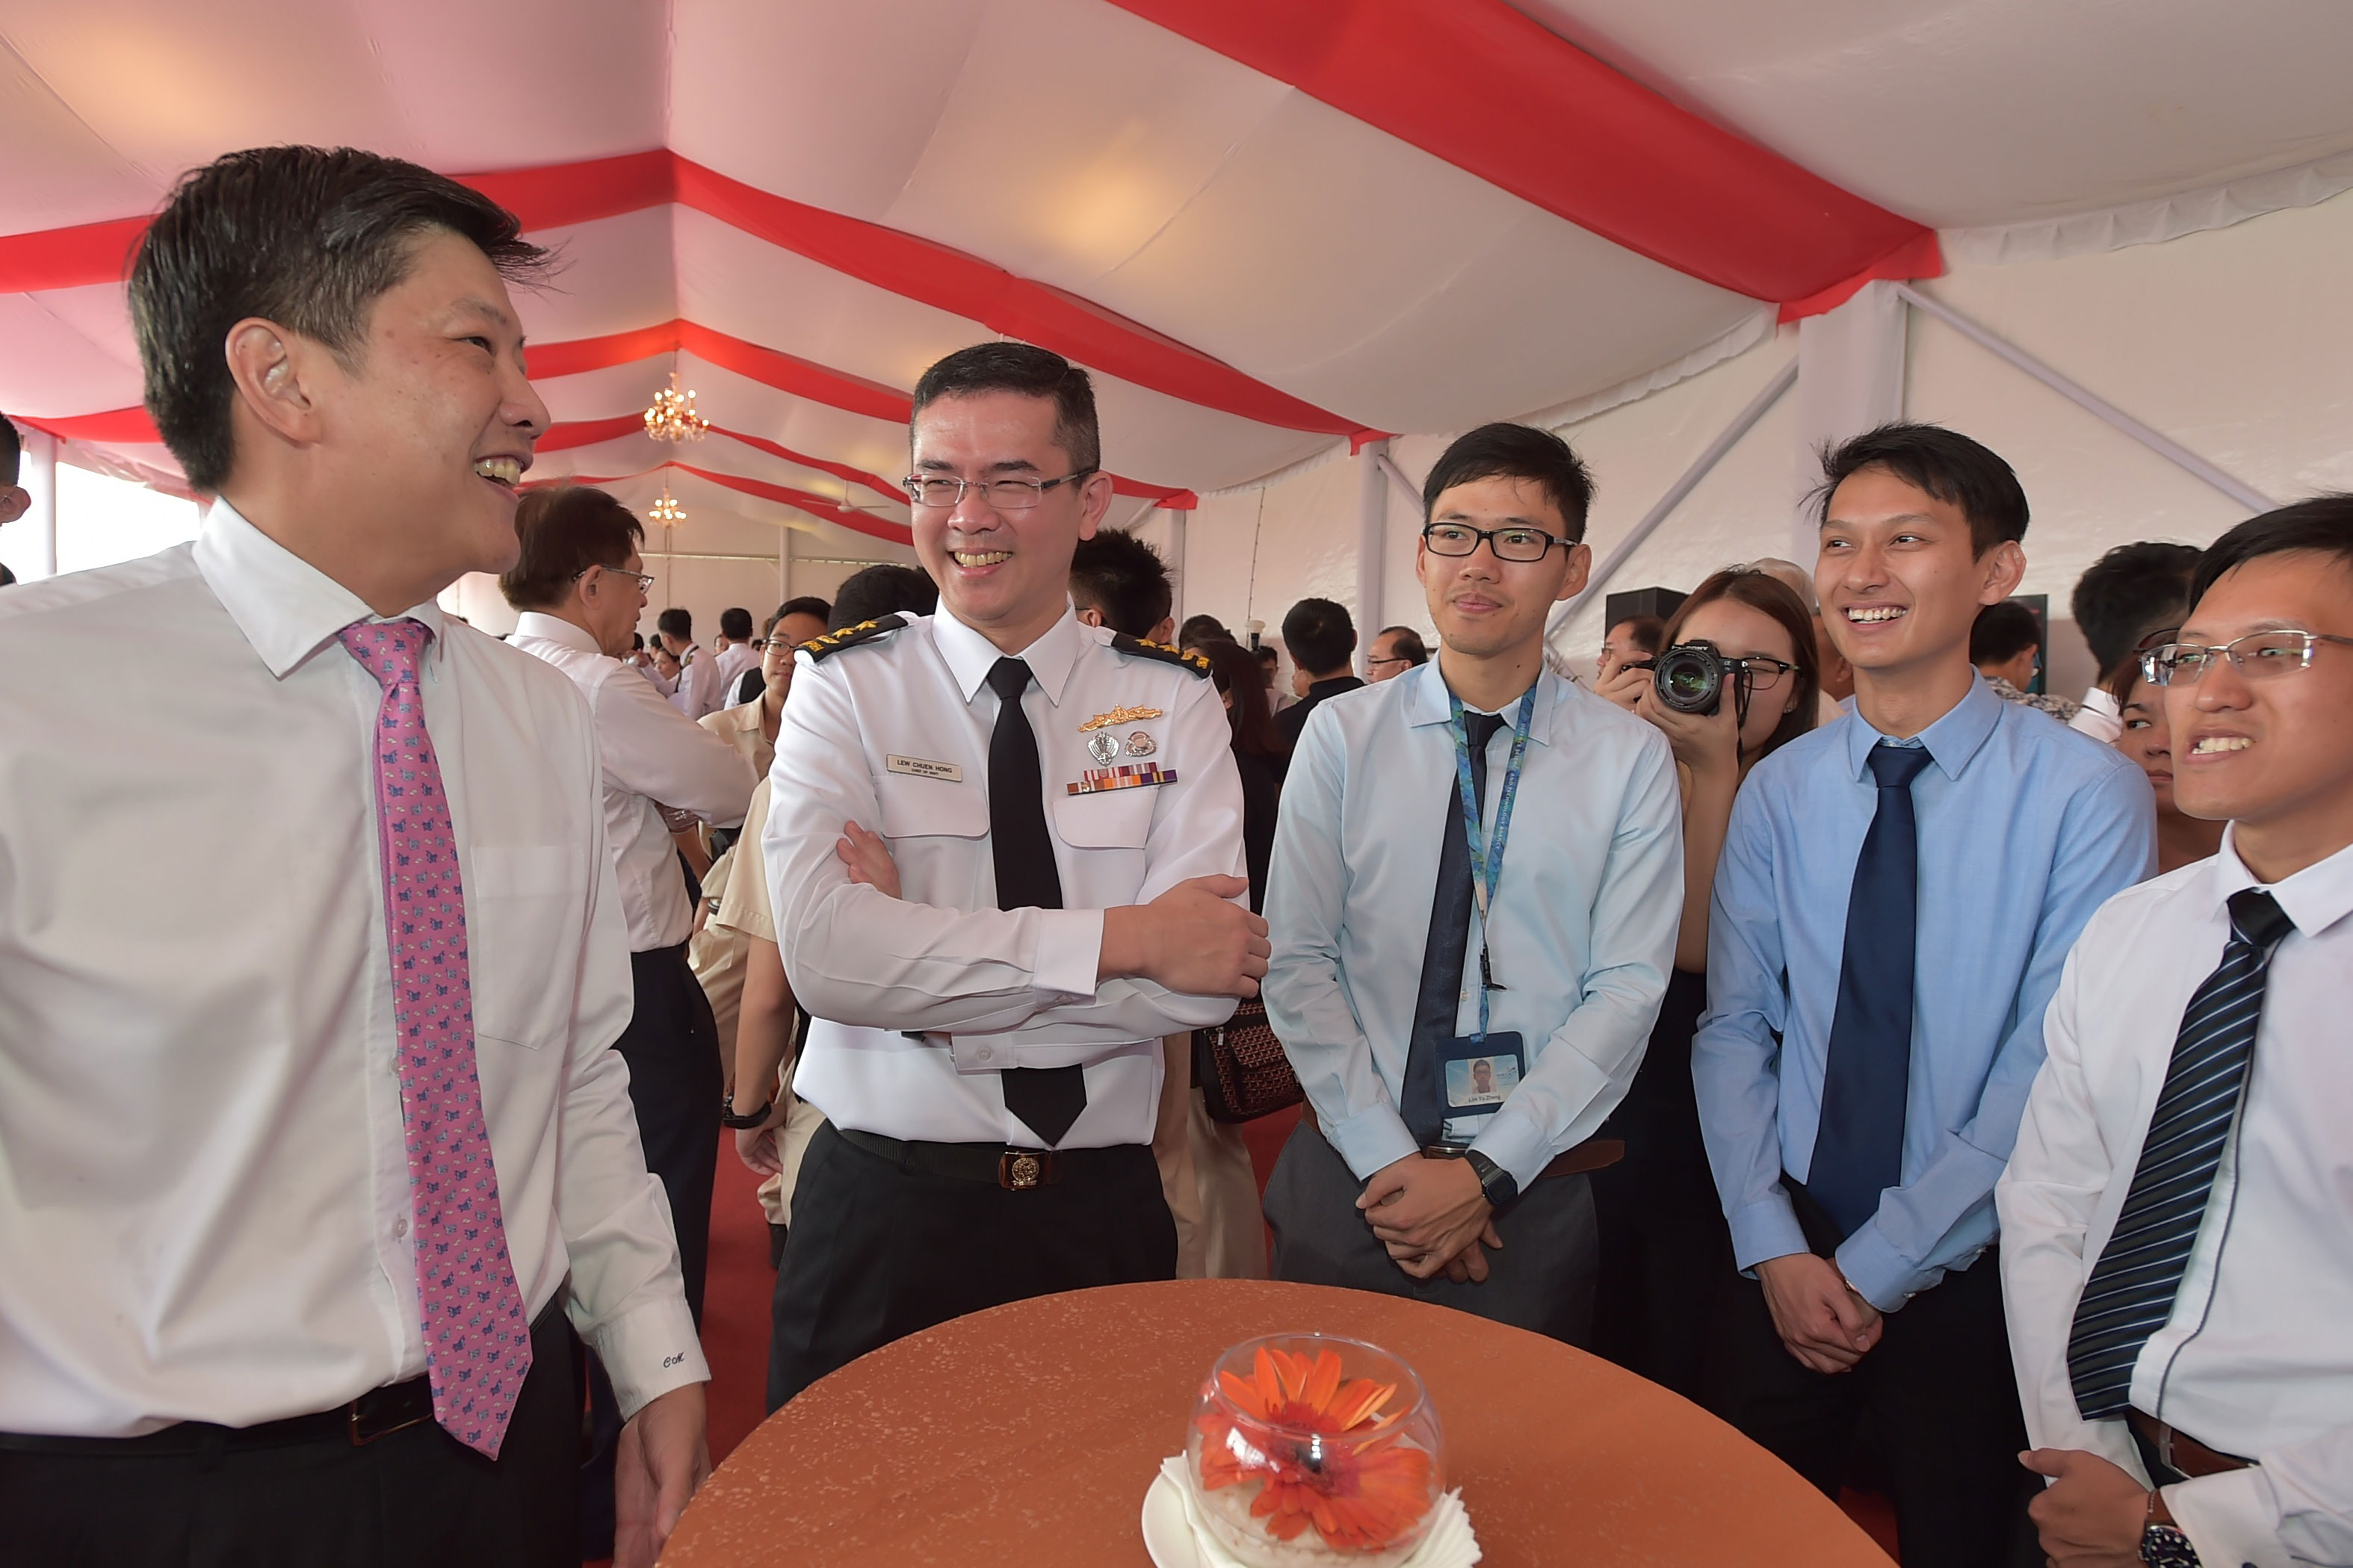 Mr Ng (left) and Chief of Navy Rear-Admiral Lew Chuen Hong interacting with representatives from Defence Science and Technology Agency.